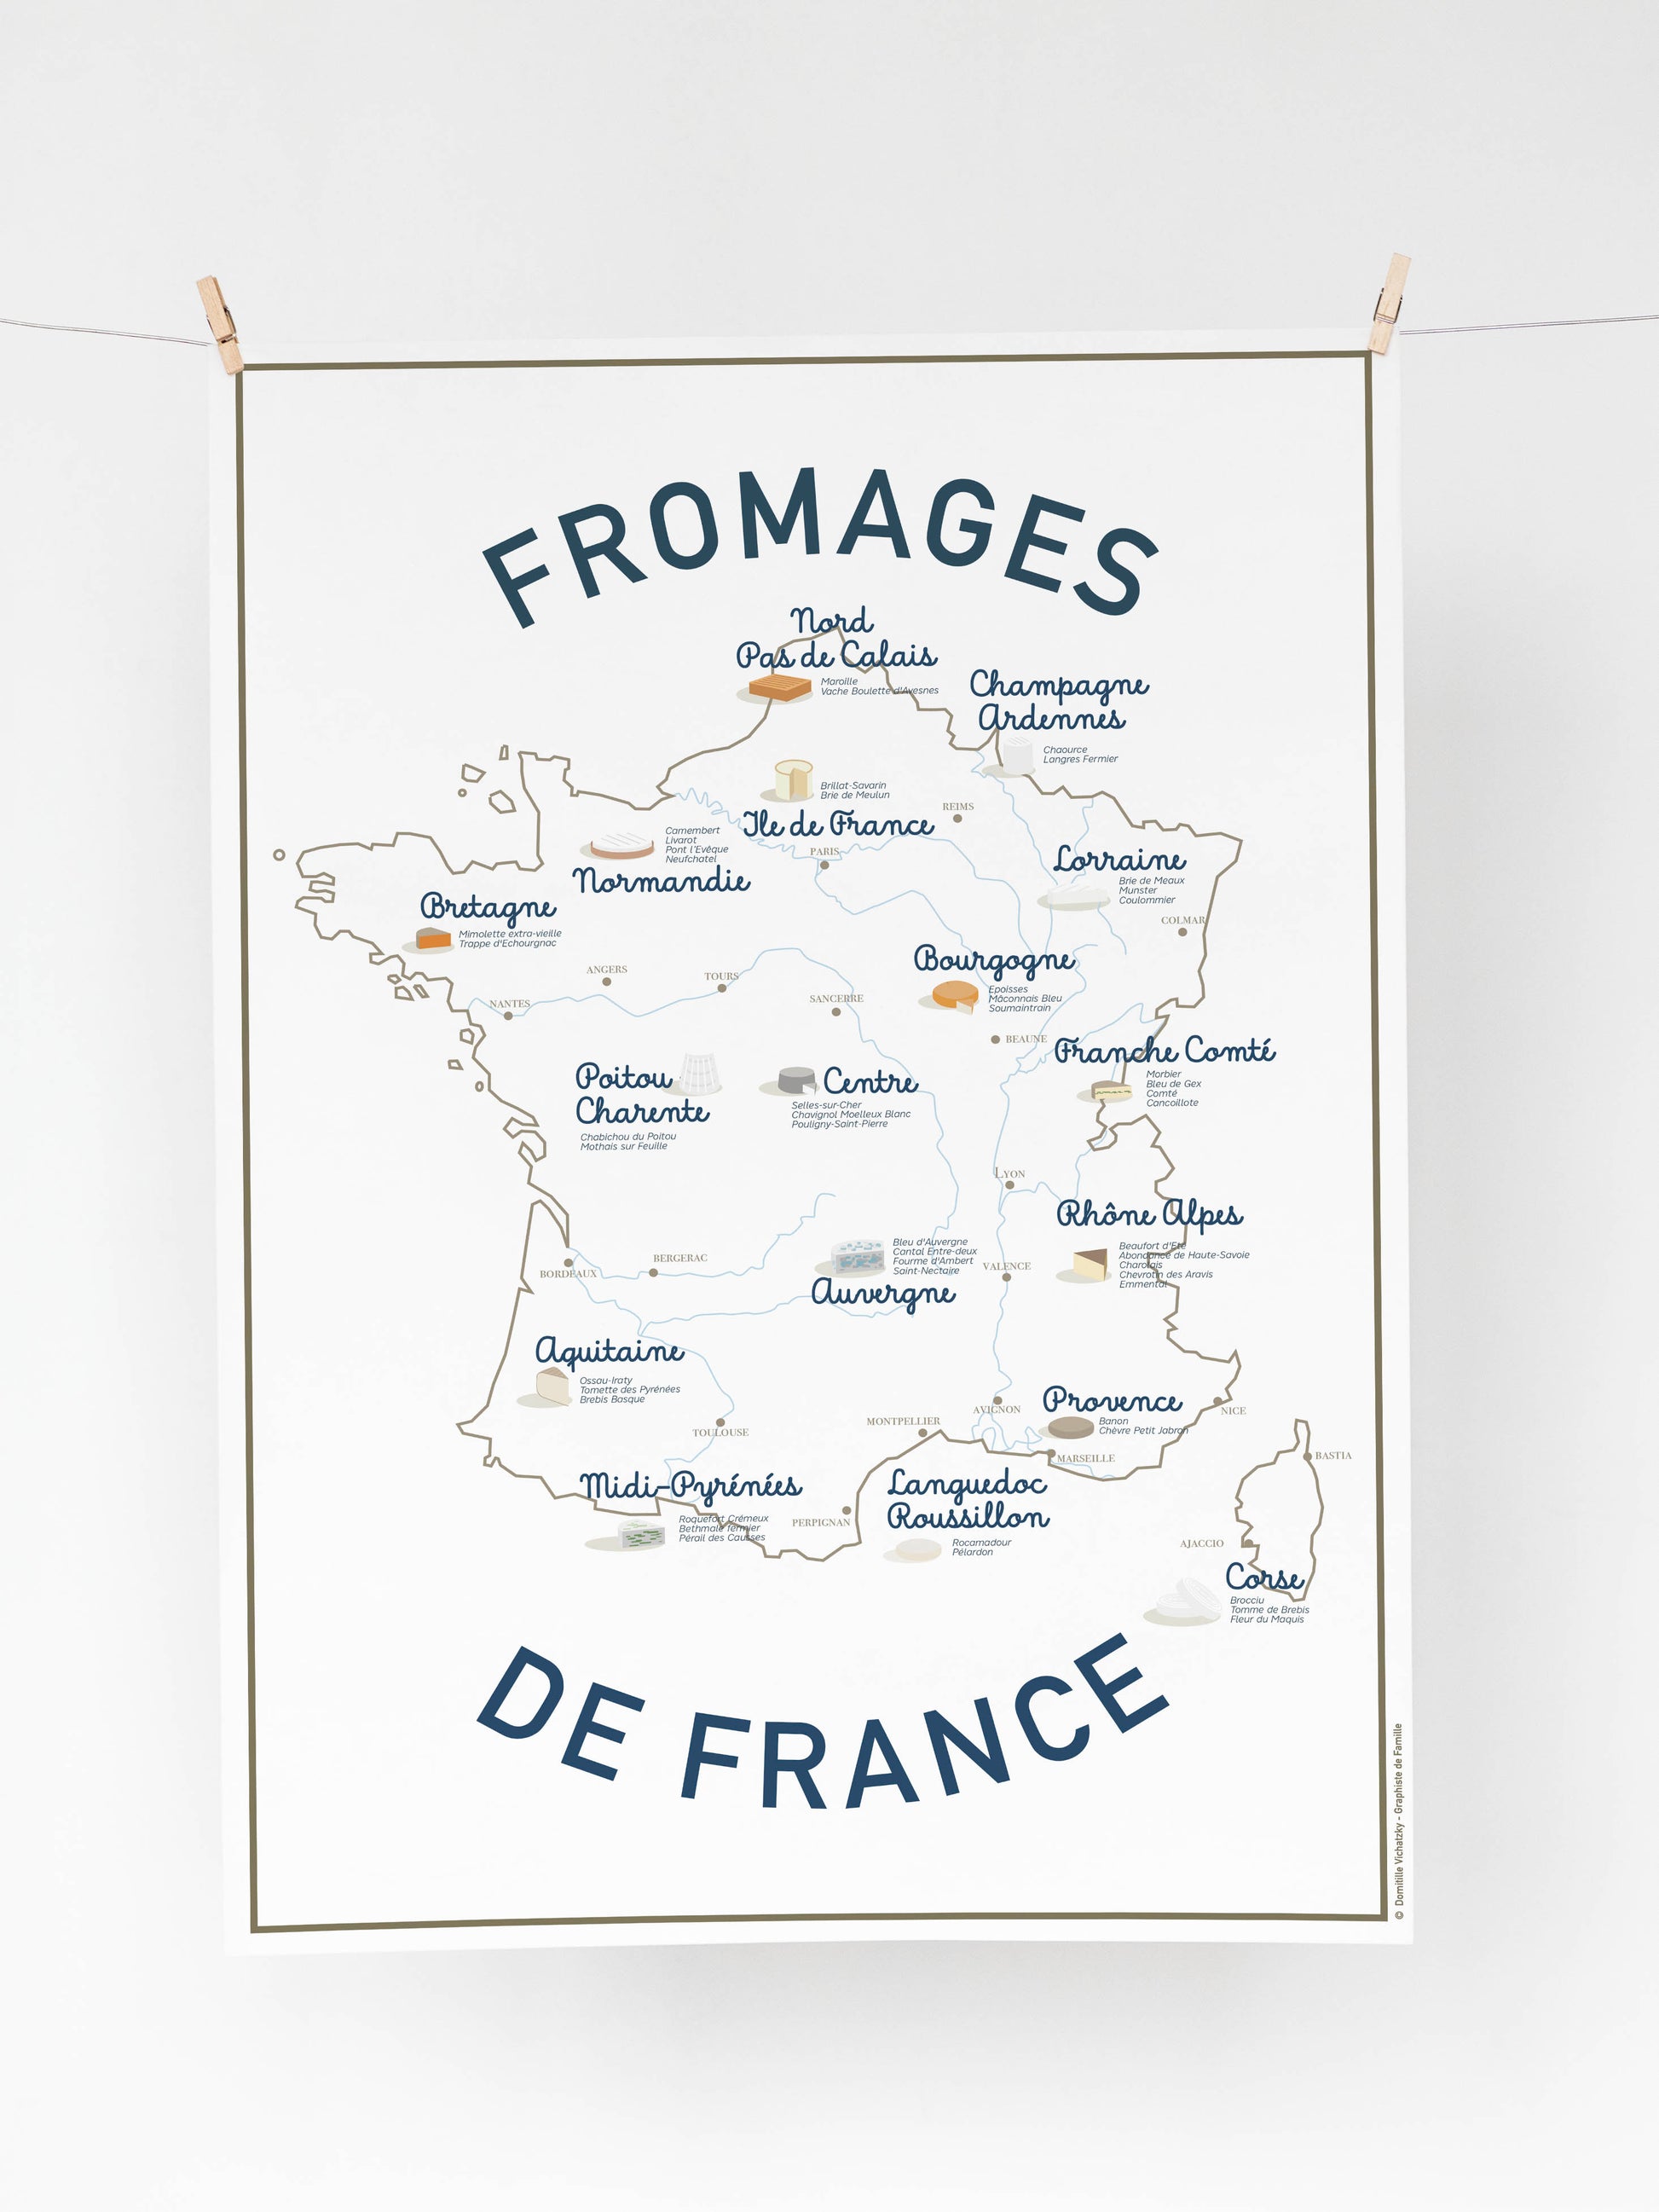 Poster d'art - carte des fromages de france - frog posters Wall Editions